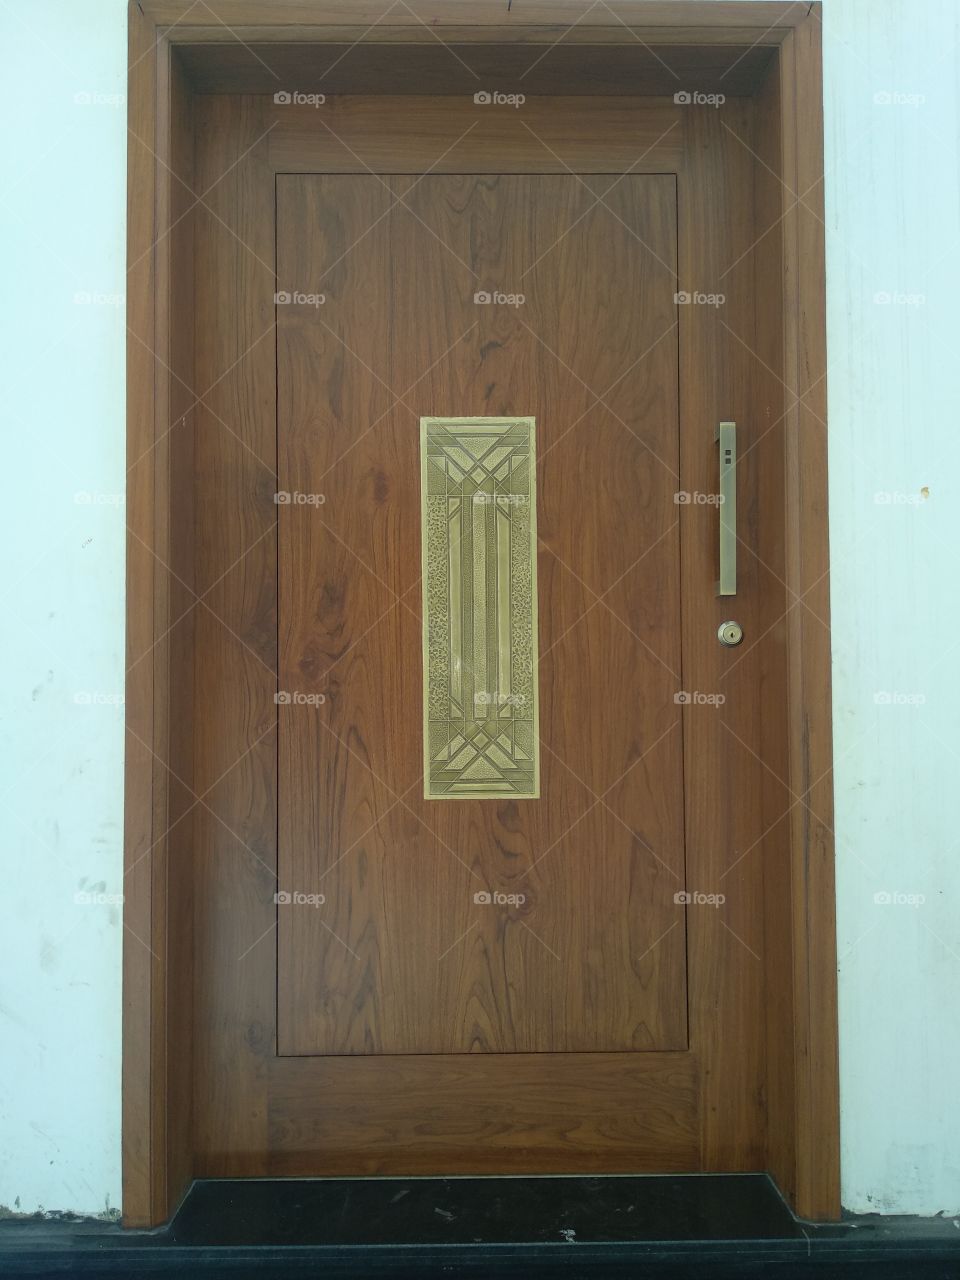 Classic style doors with brass engravings